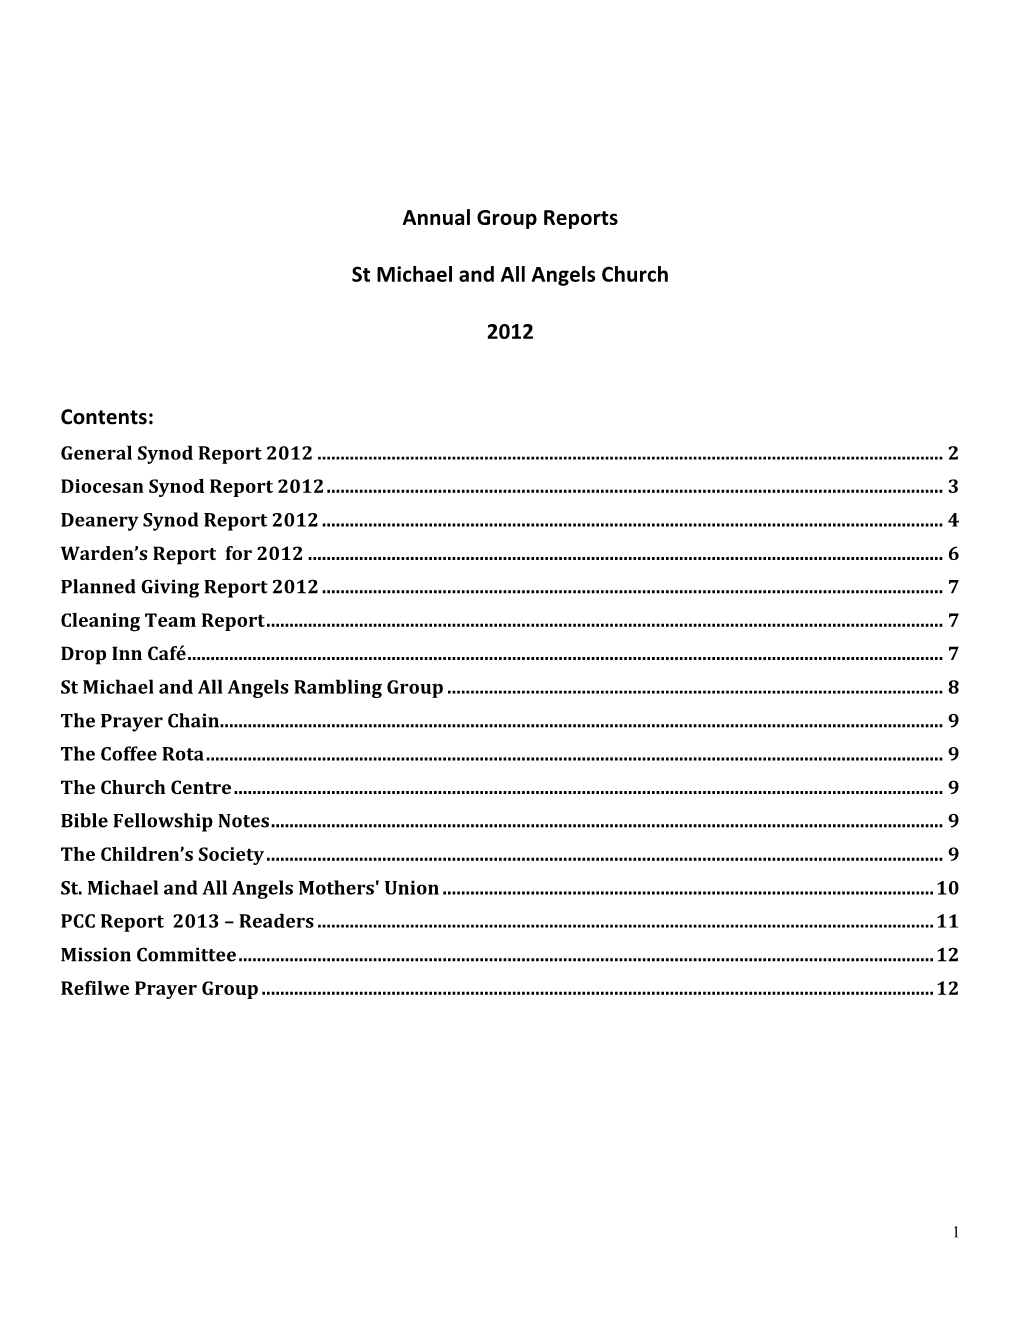 Annual Group Reports St Michael and All Angels Church